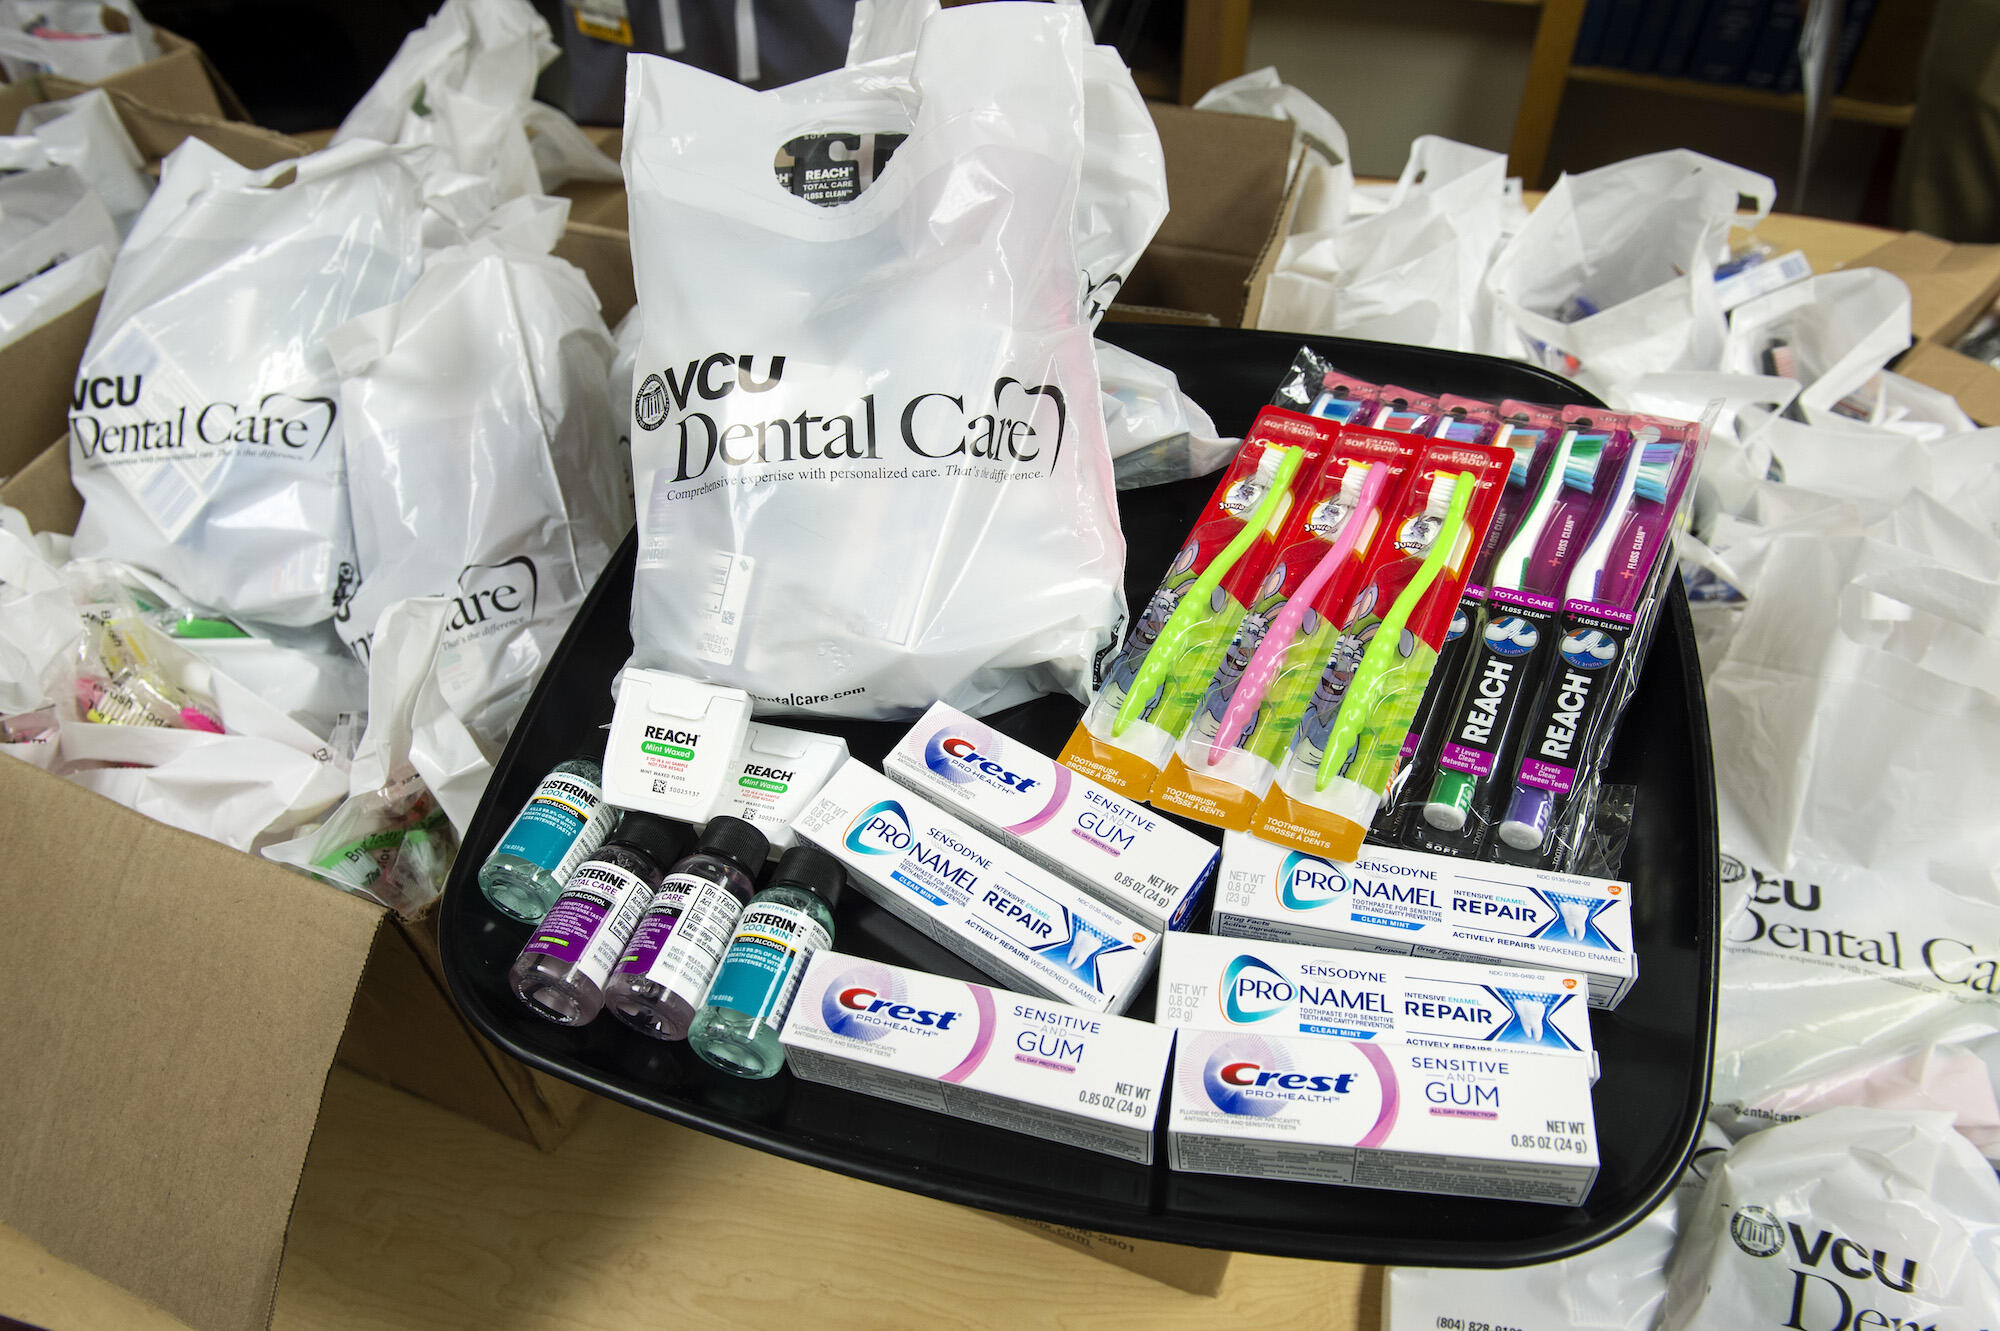 dental supplies, including toothpaste, toothbrushes and dental floss, in bags